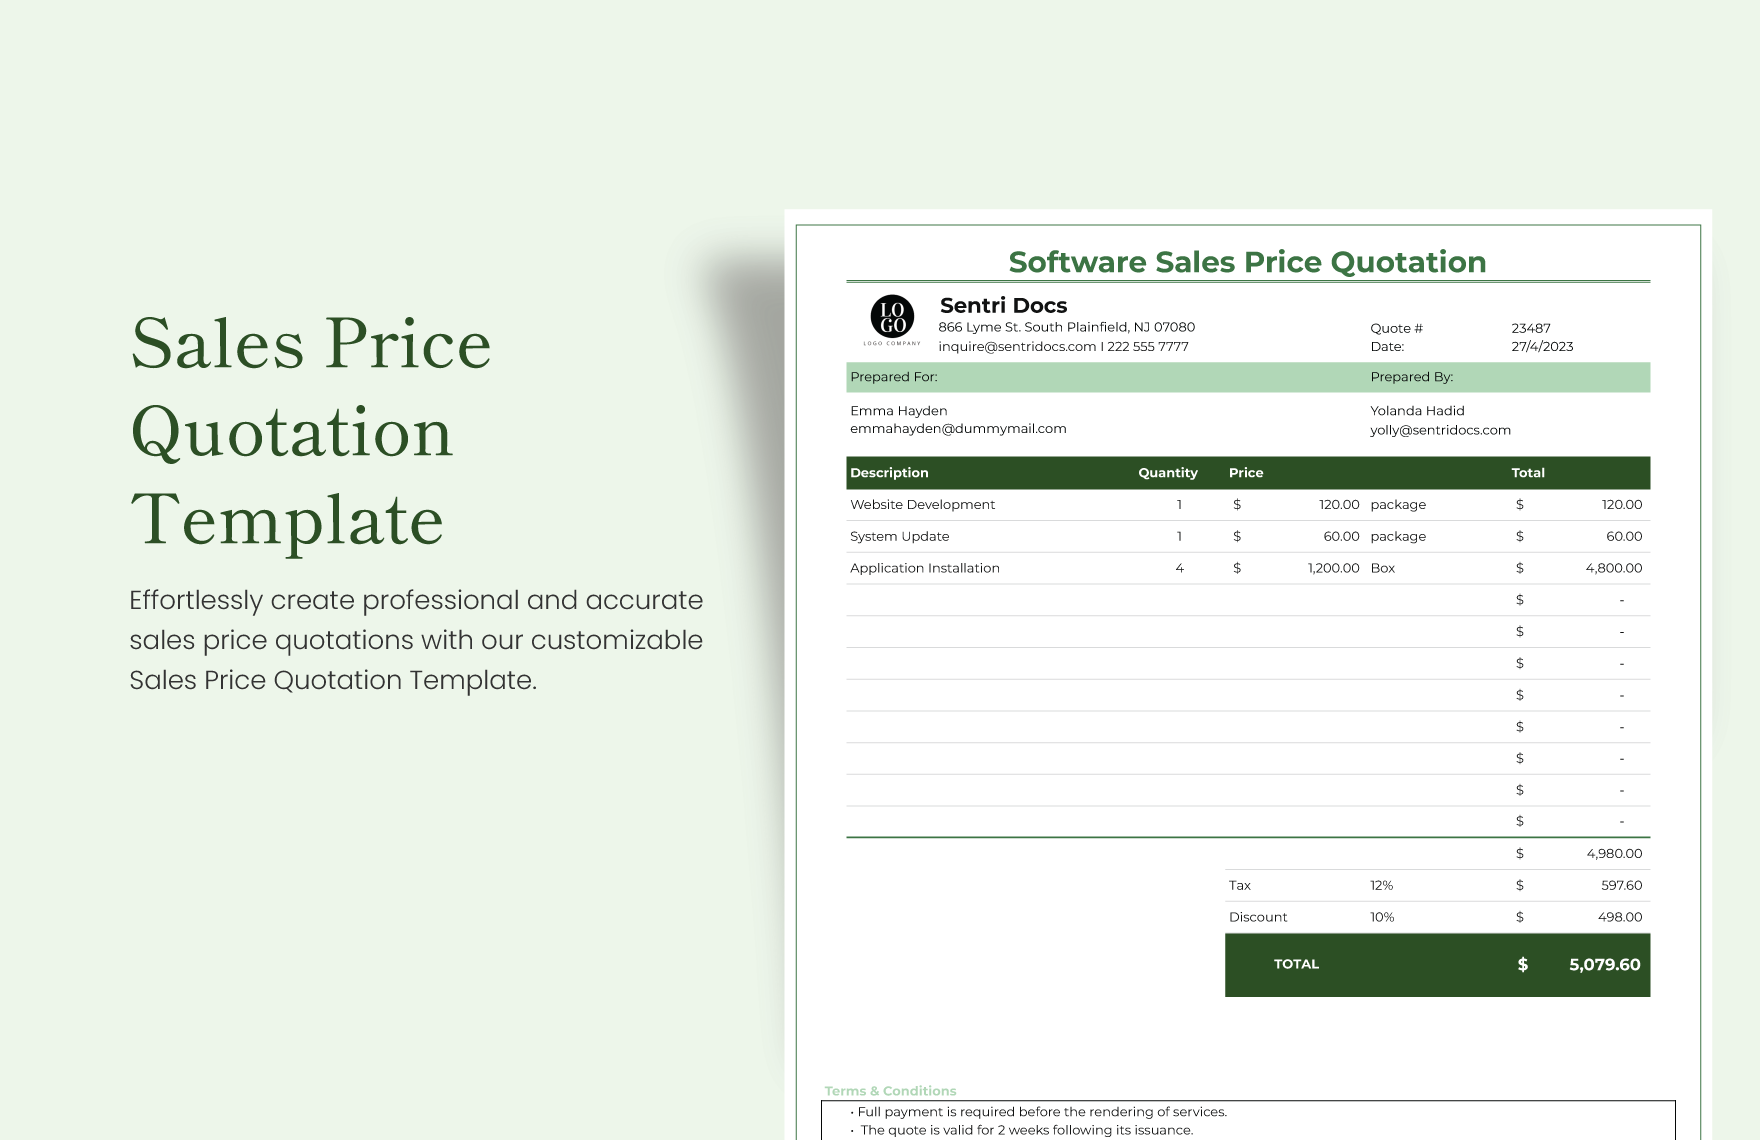 Sales Price Quotation Template